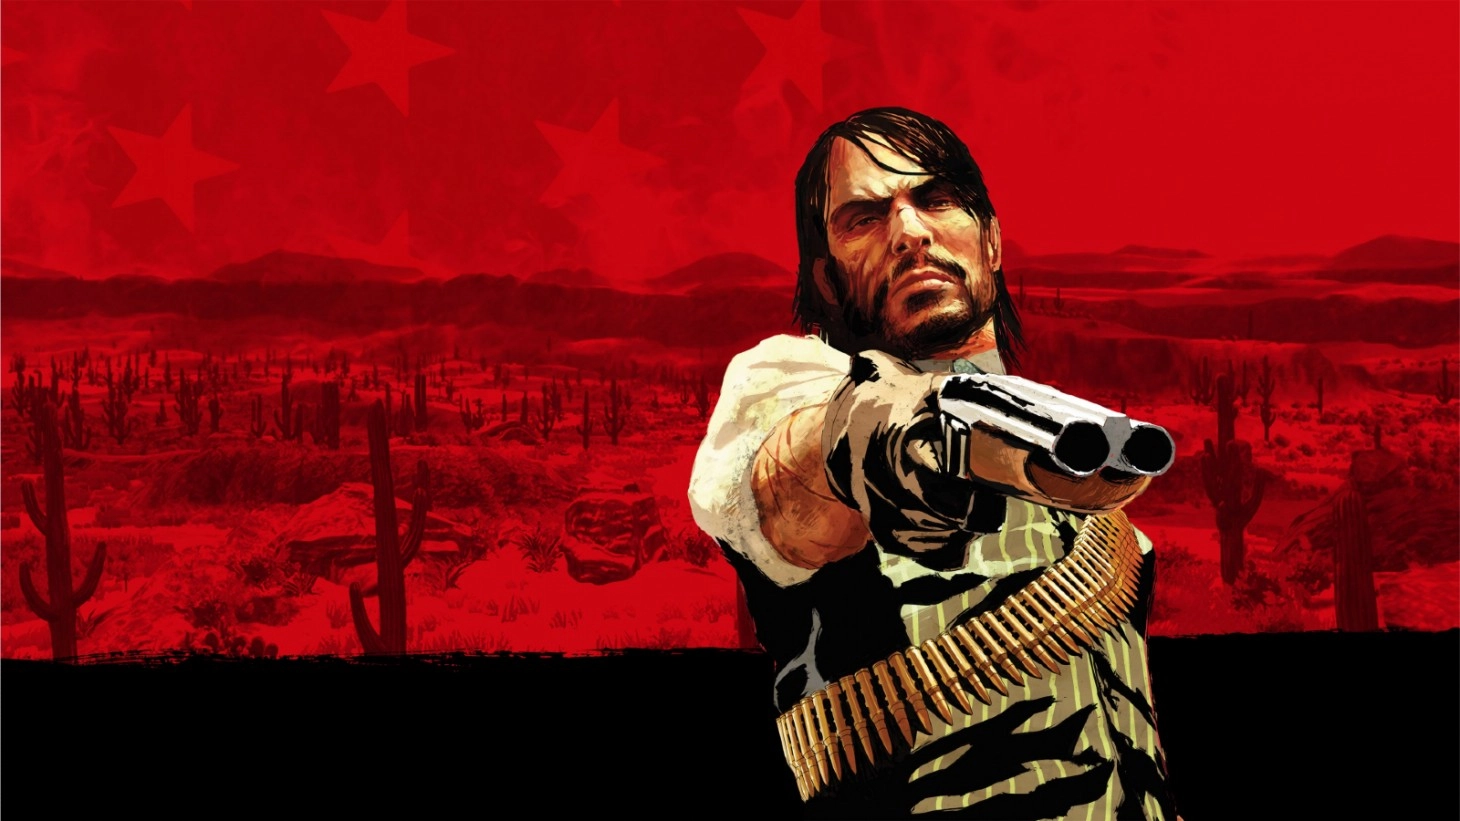 Yeehaw, Red Dead Redemption gallops at 60 FPS on PS5!